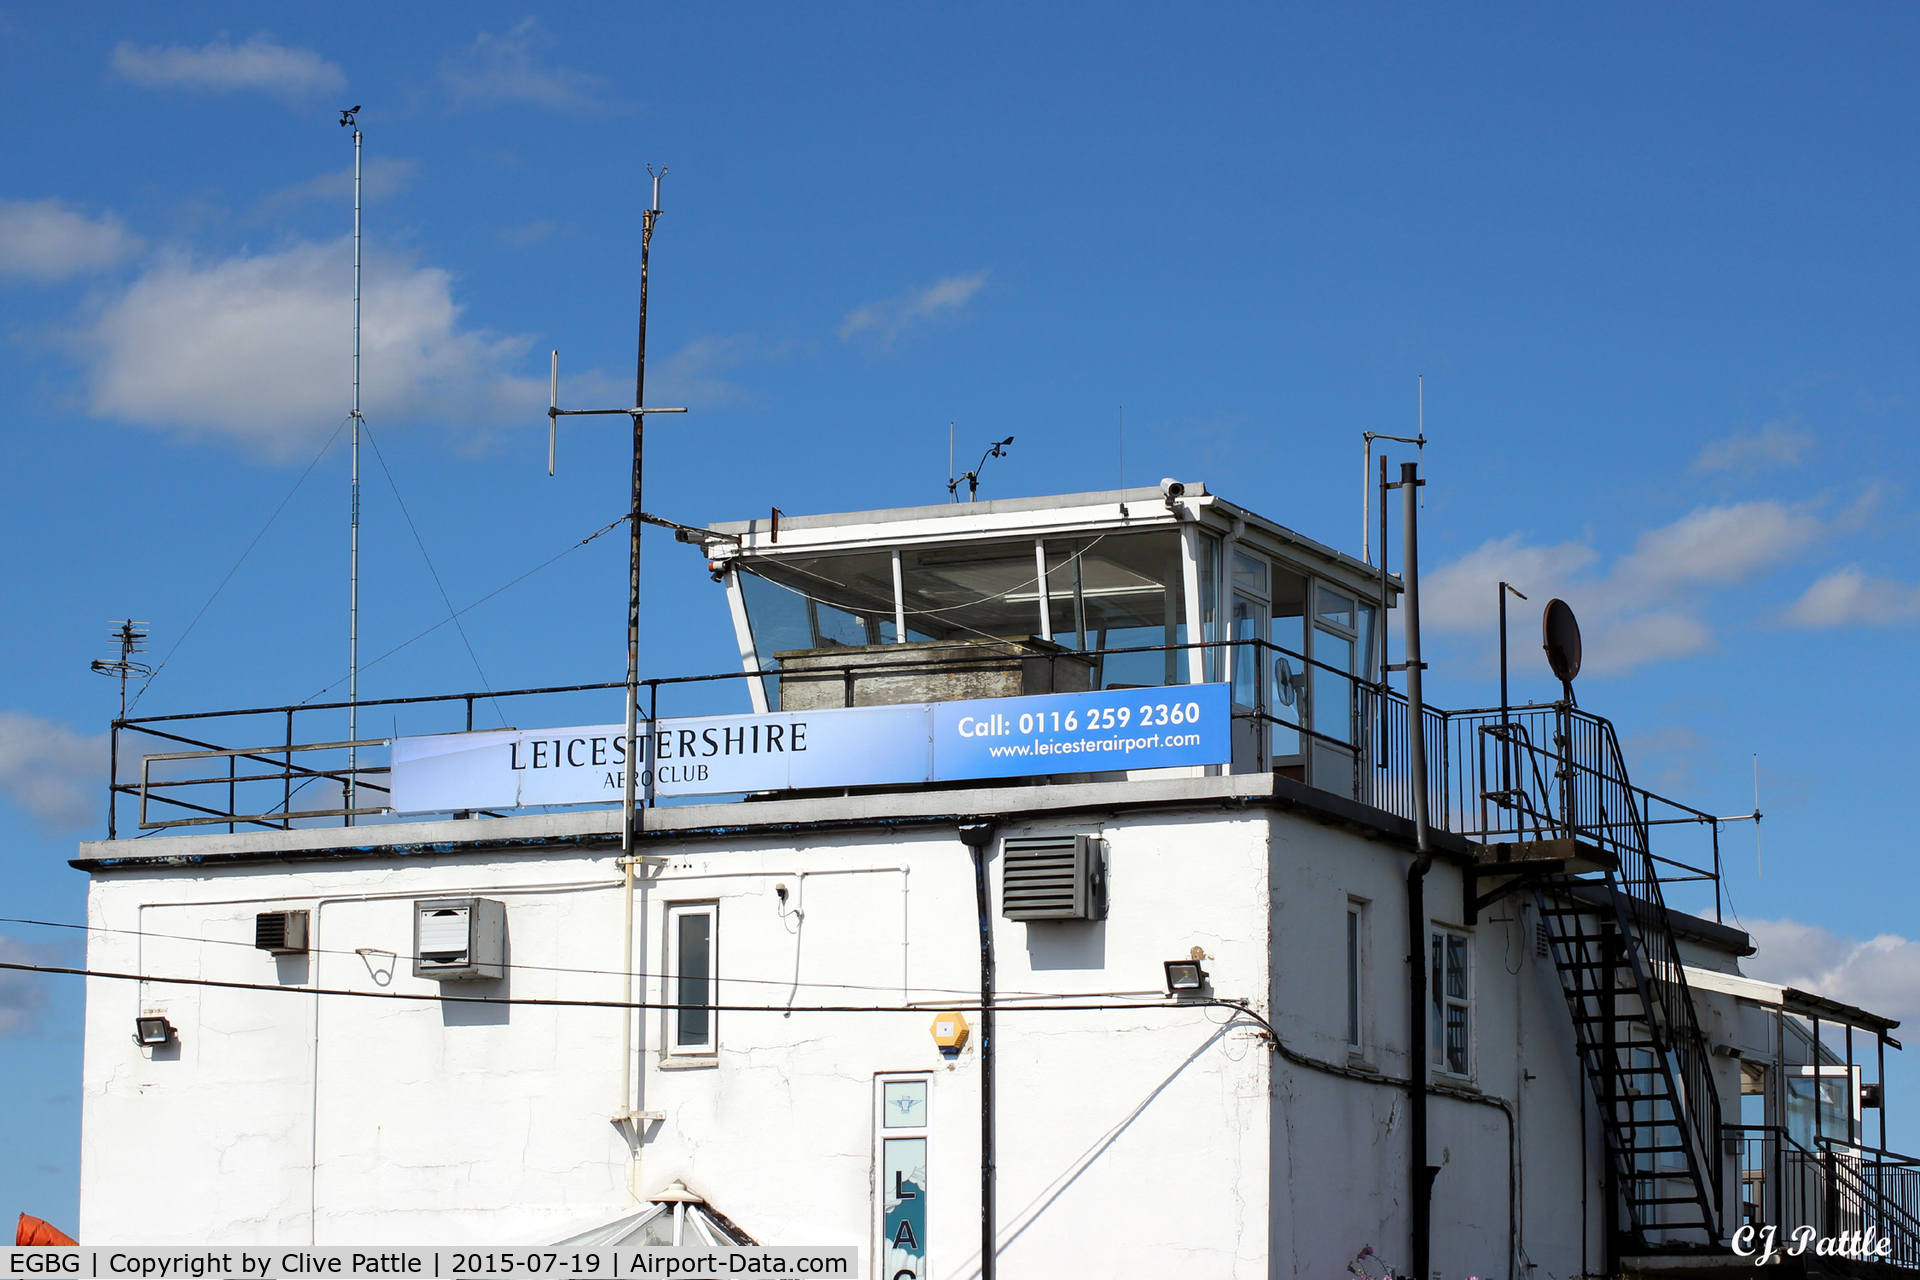 Leicester Airport, Leicester, England United Kingdom (EGBG) - A close-up of the Tower at Leicester Airfield, EGBG, UK.